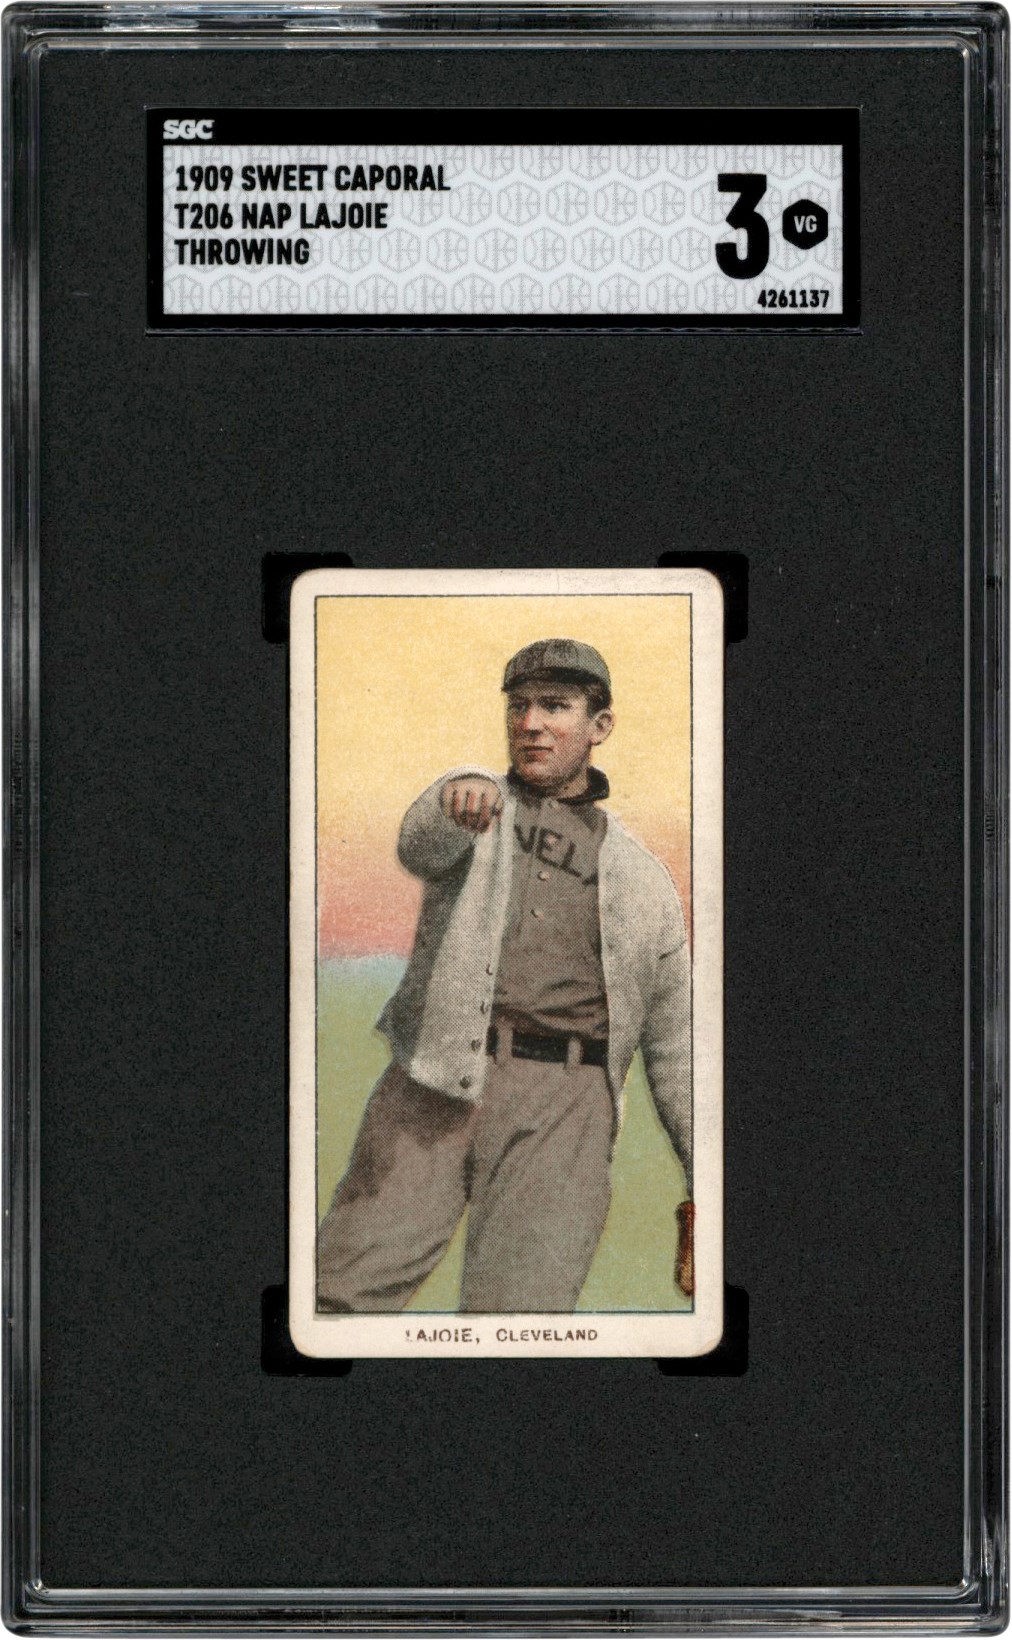 - 909-1911 T206 Nap Lajoie Sweet Caporal (Throwing) SGC VG 3